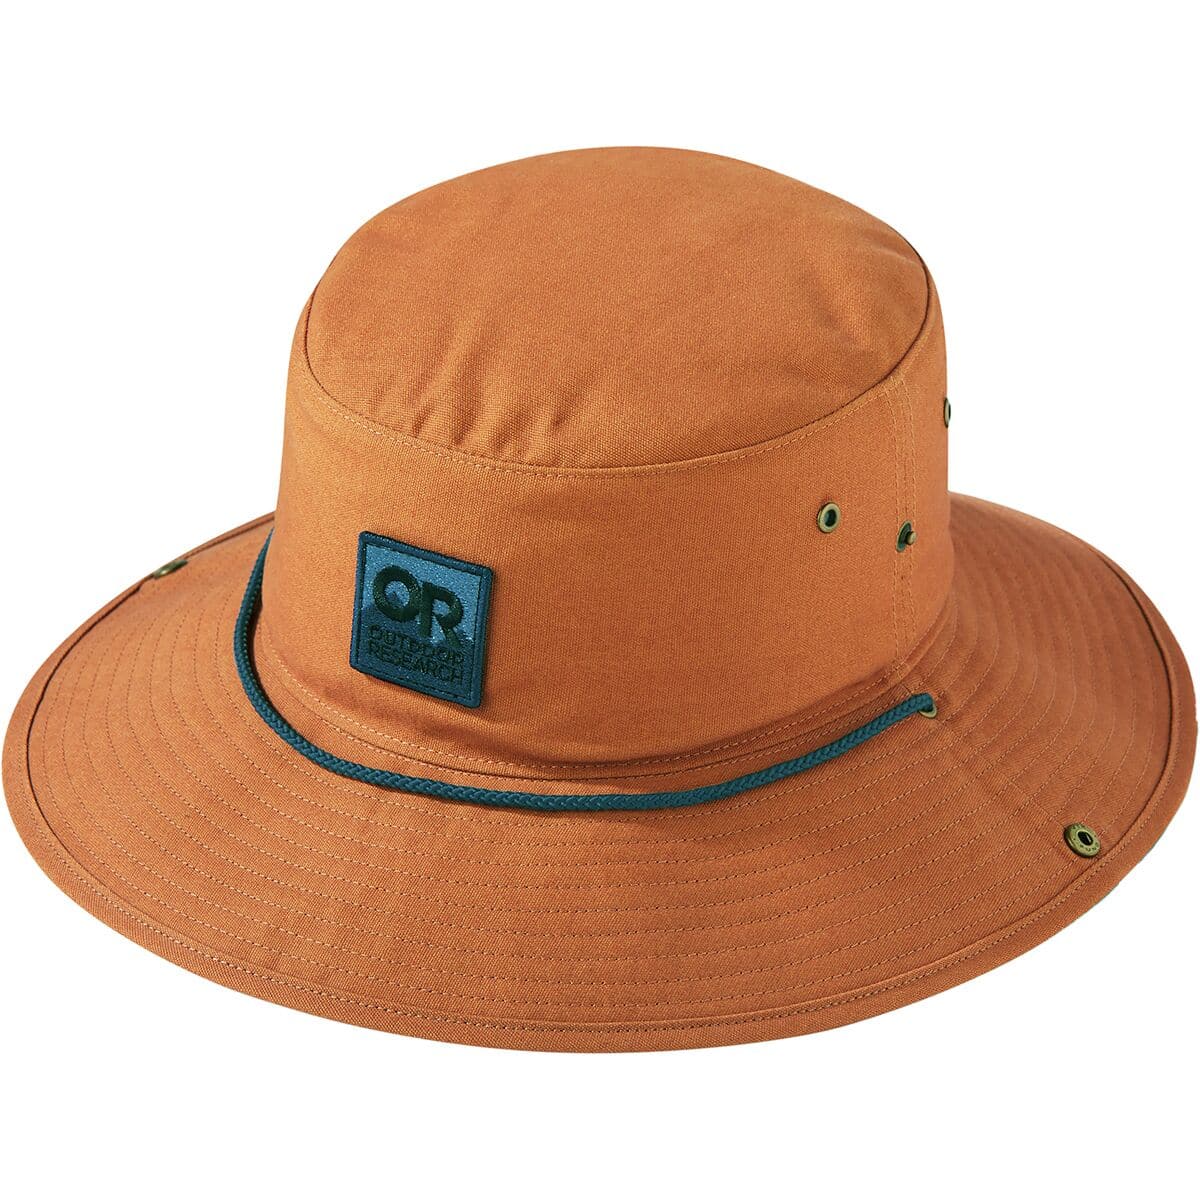 Featuring the Moab Sun Hat hat, visor manufactured by OR shown here from a fourth angle.